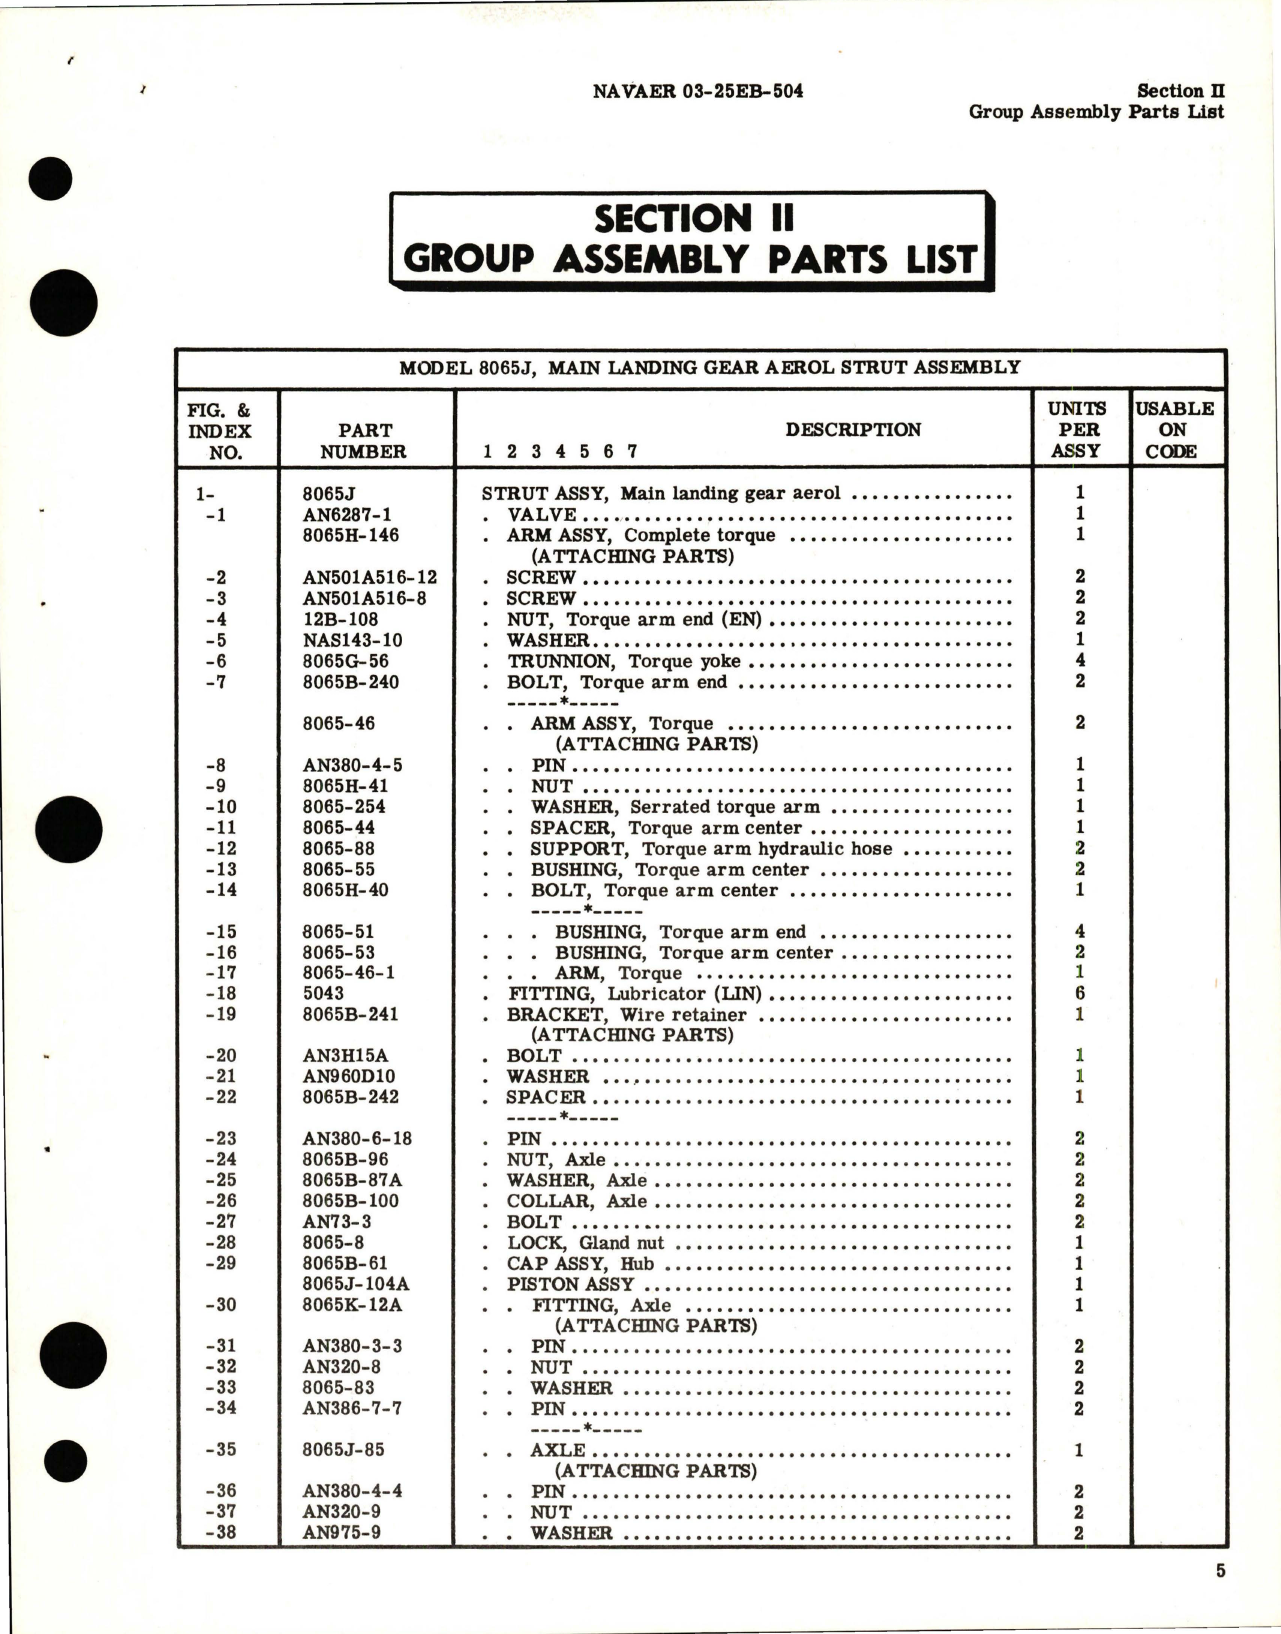 Sample page 7 from AirCorps Library document: Illustrated Parts Breakdown for Landing Gear Aerol Struts